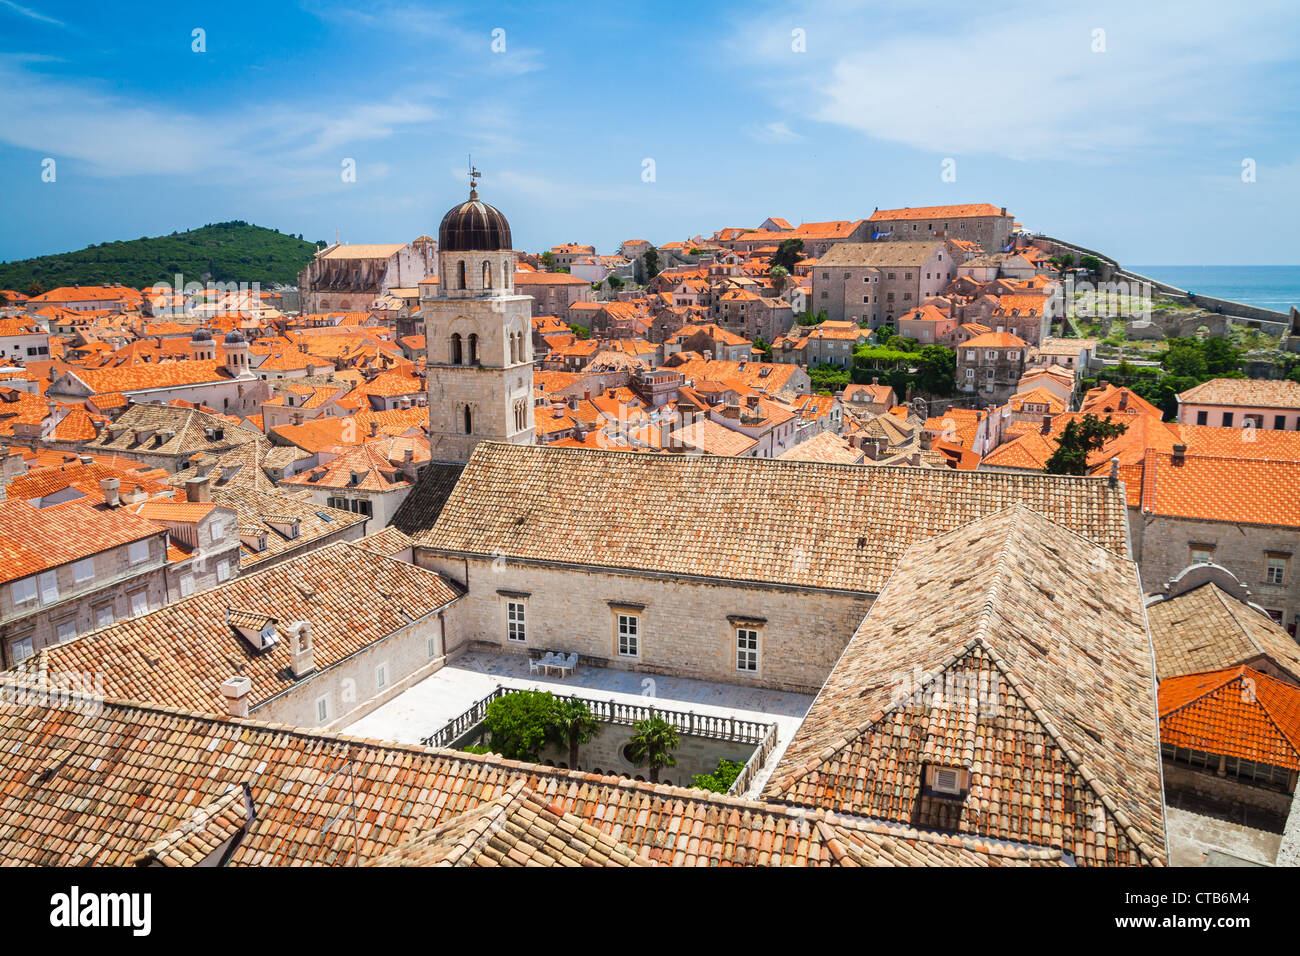 Church gallery in Dubrovnik's Old Town Stock Photo